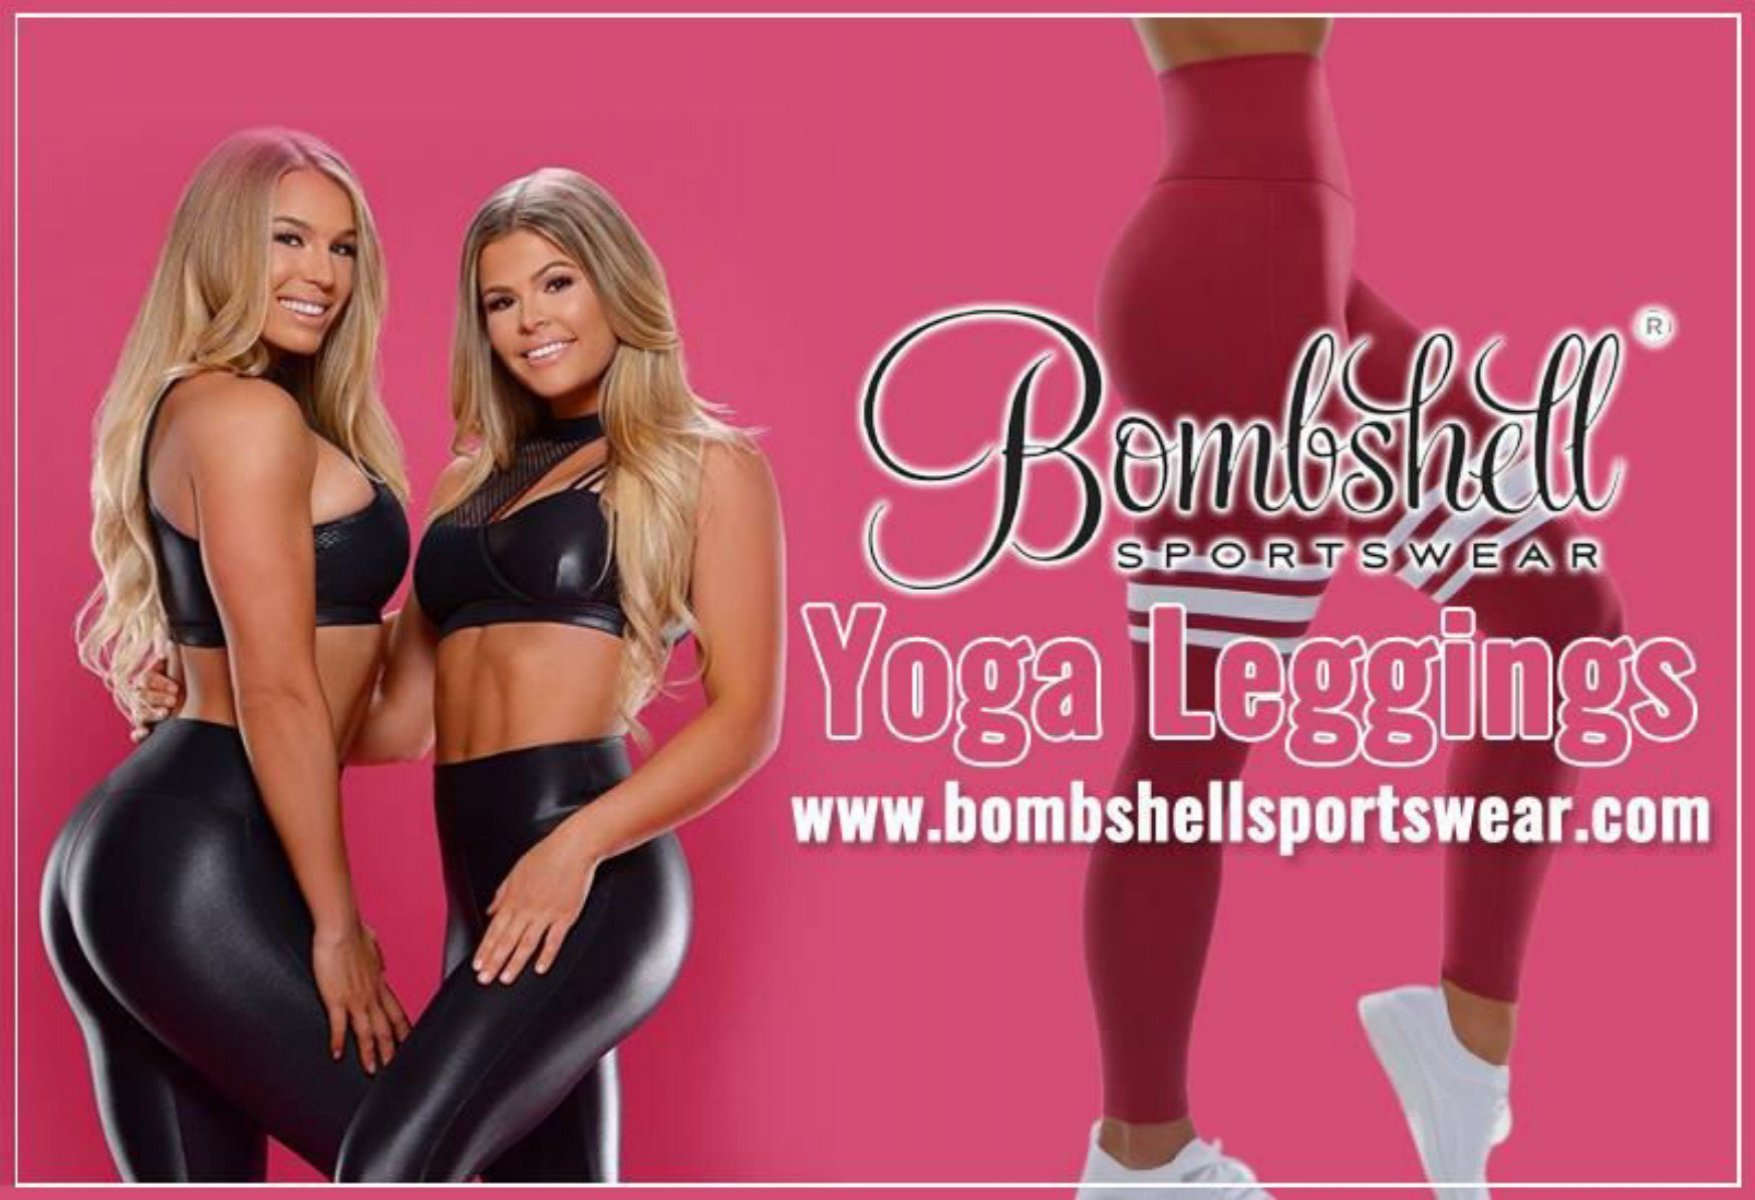 Get Special Discounts on Yoga Leggings at Bombshell Sportswear